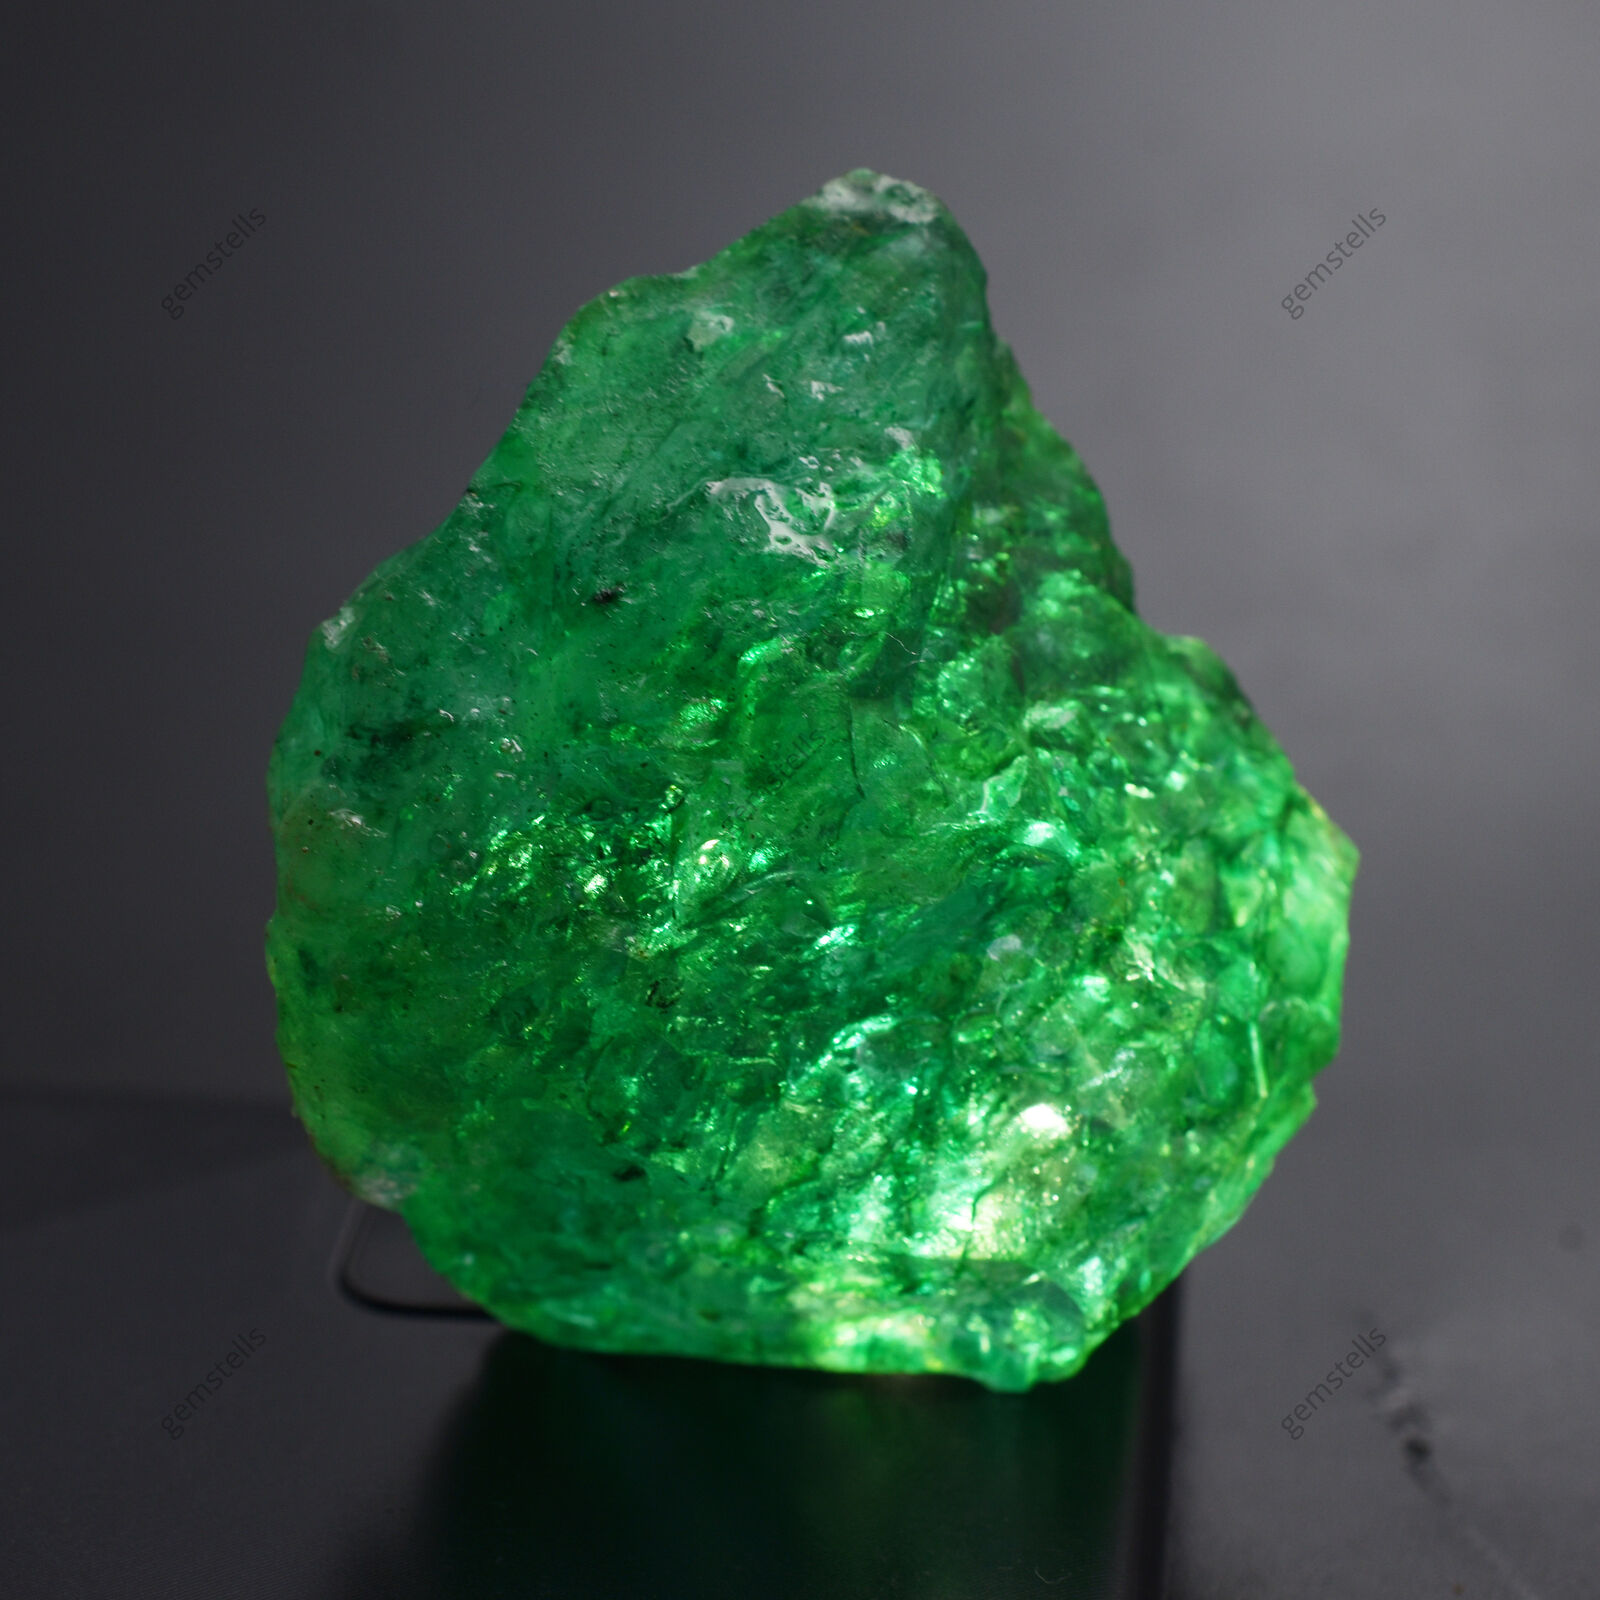 CERTIFIED Natural Emerald Earth Mined Green Huge Rough 449.85 Ct Loose Gemstone